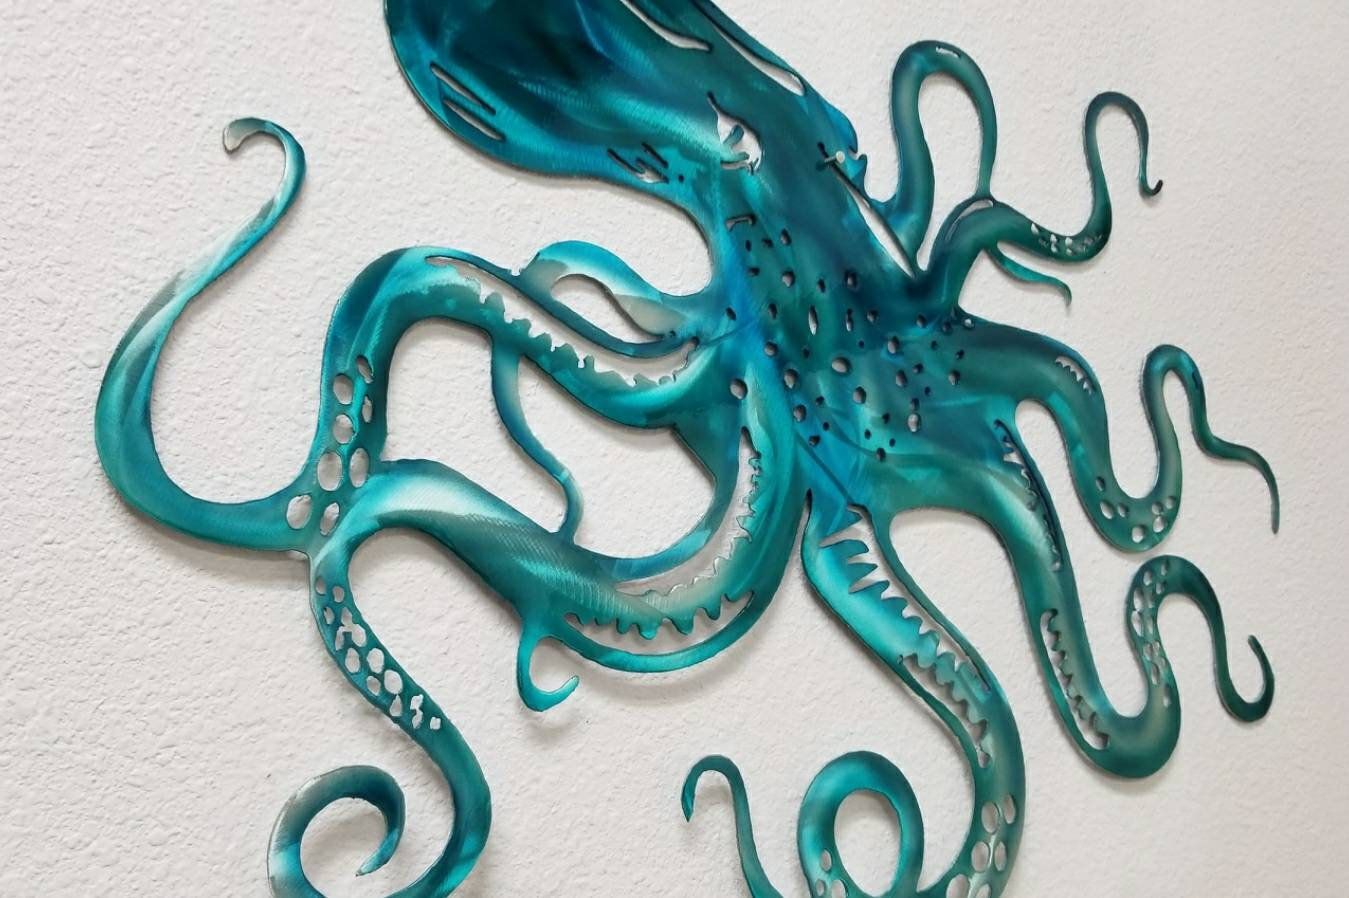 Octopus Metal Wall Art, Turqoise And Blue Octopus, Home Decor For With Regard To Latest Octopus Metal Wall Sculptures (View 6 of 20)